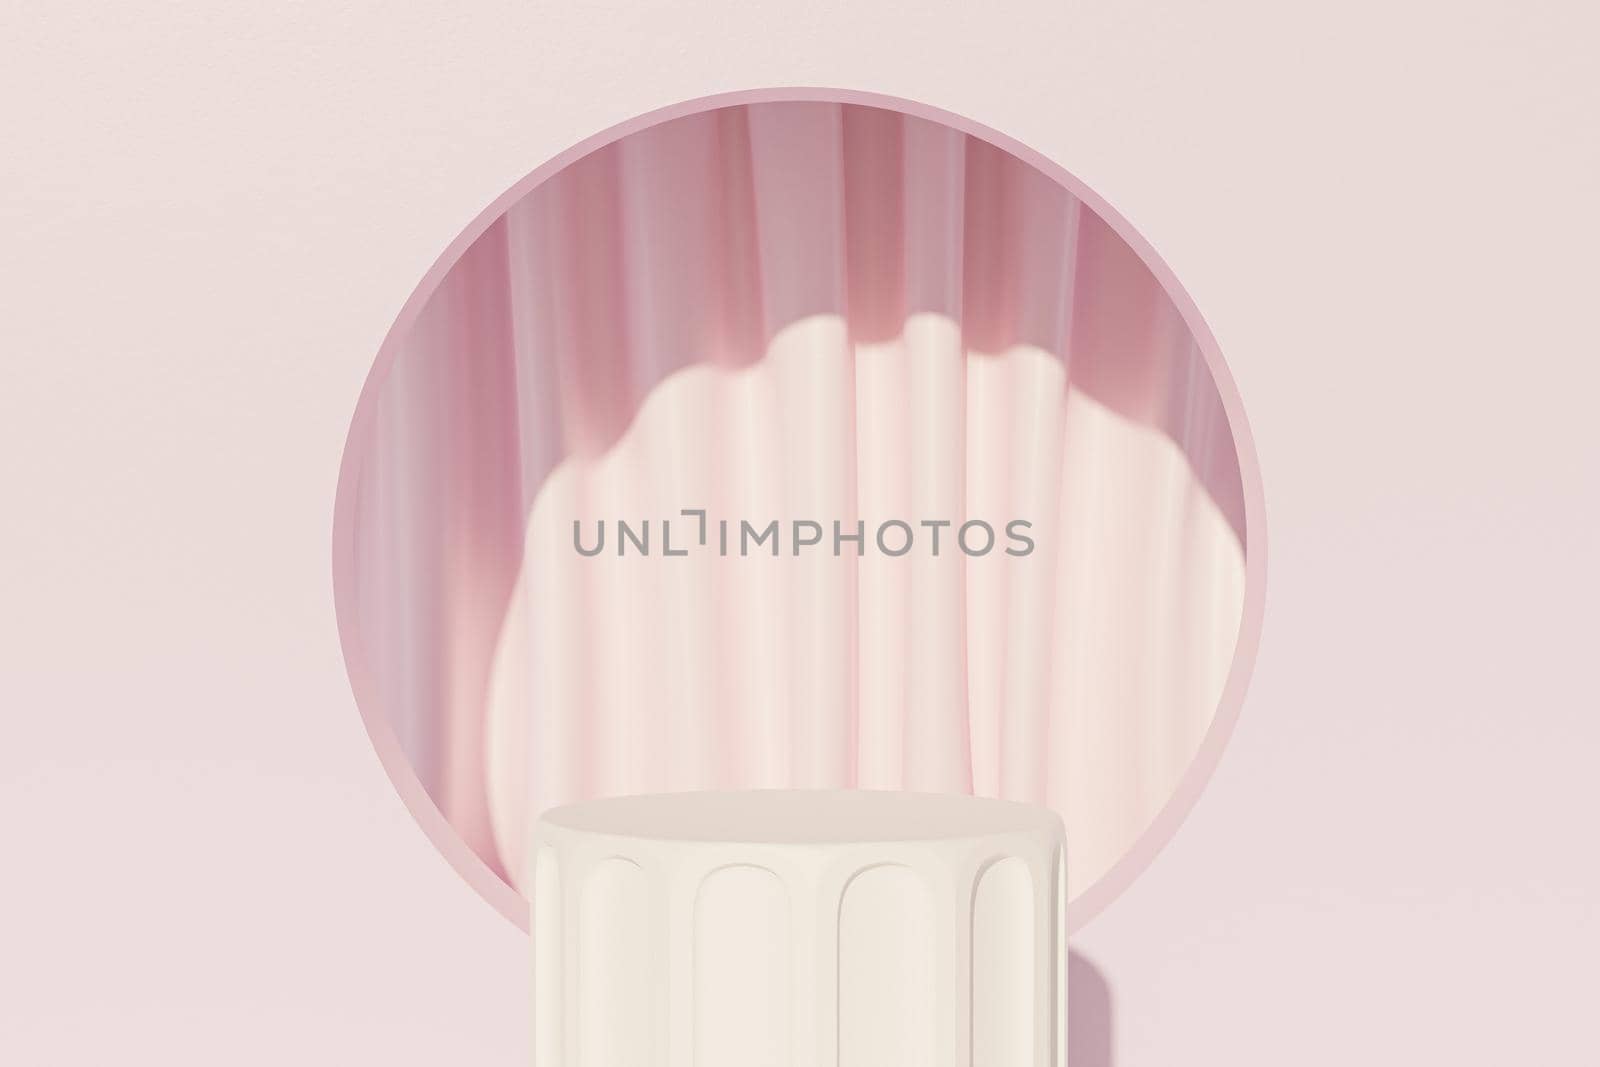 White pillar podium or pedestal for products or advertising near to pink curtains, minimal 3d illustration render by Frostroomhead